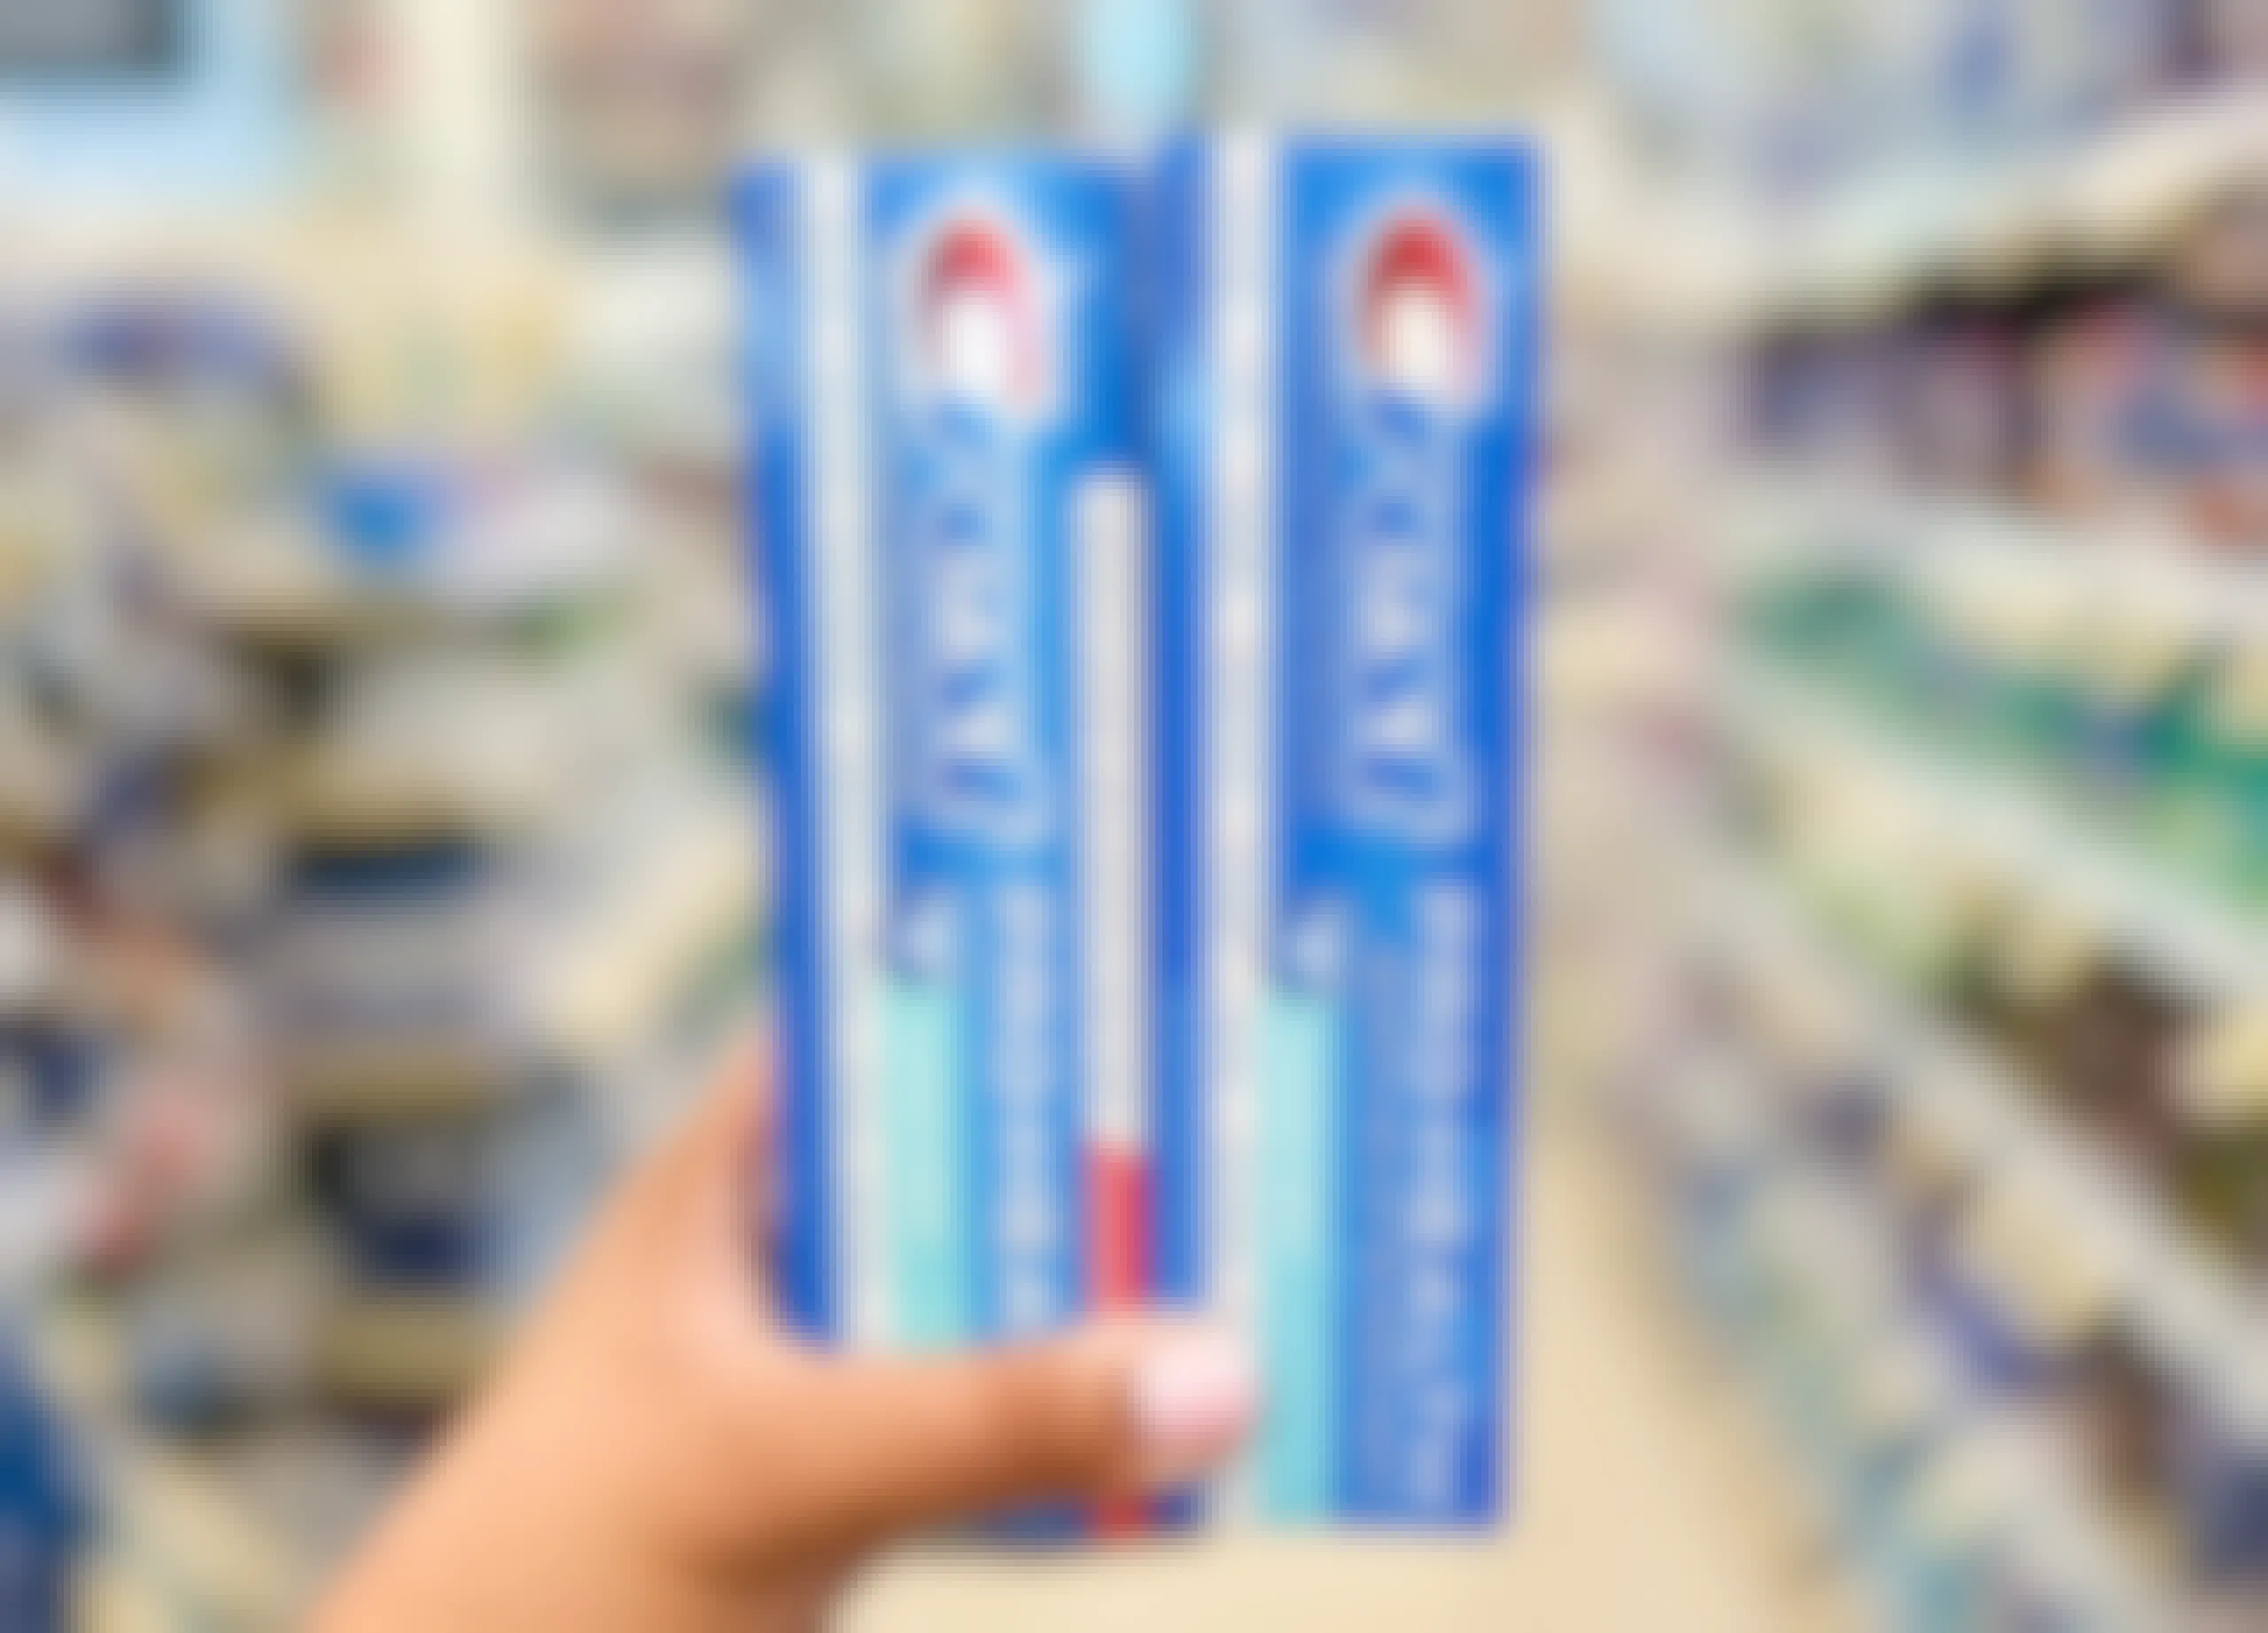 Hand holding two boxes of Crest Pro-Health toothpaste